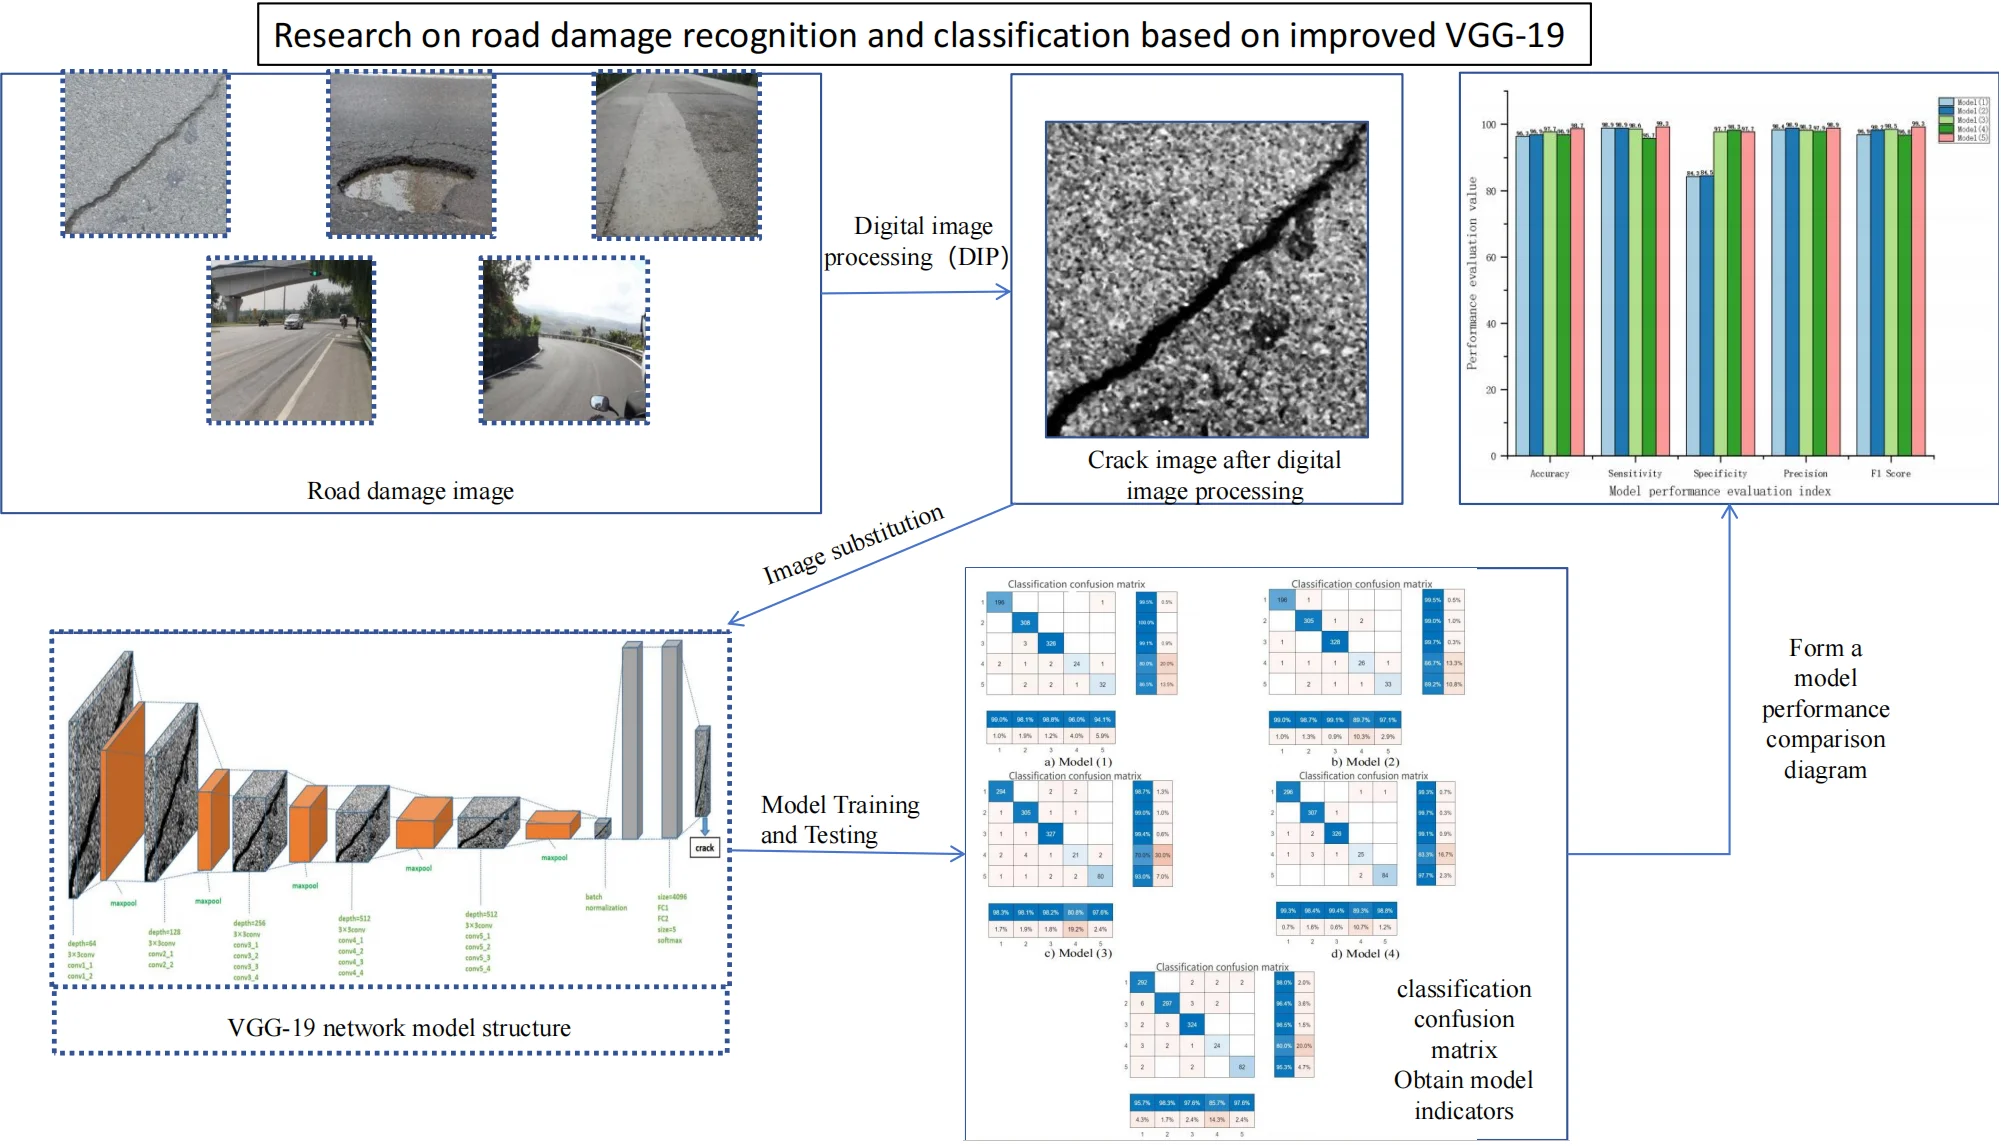 Research on road damage recognition and classification based on improved VGG-19